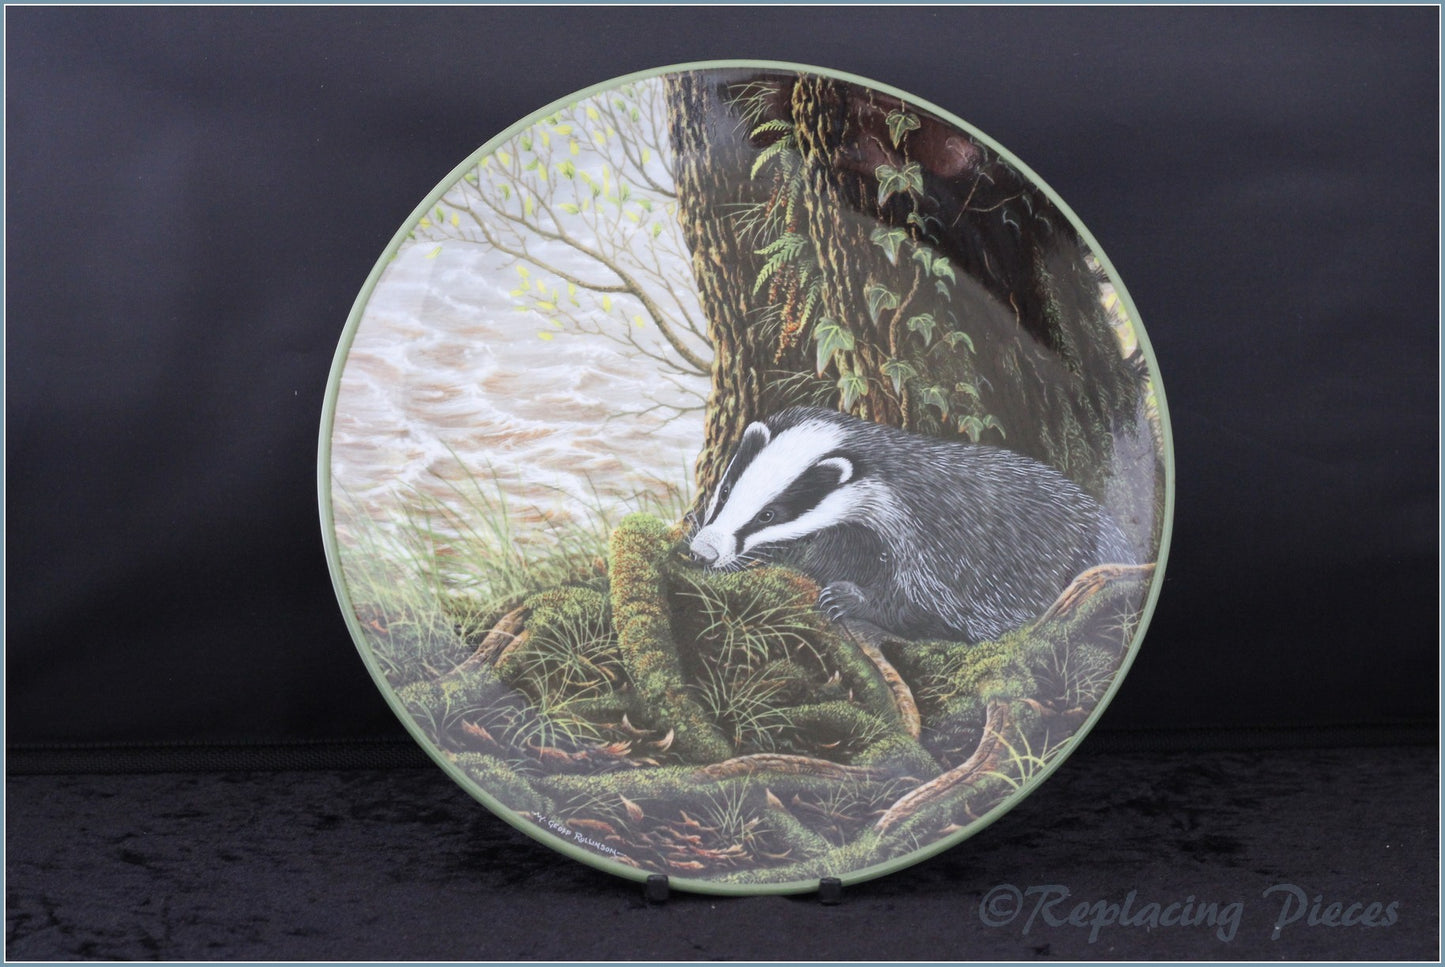 Royal Doulton - Rollinsons Portraits of Nature - The Badger On His Evening Prowl